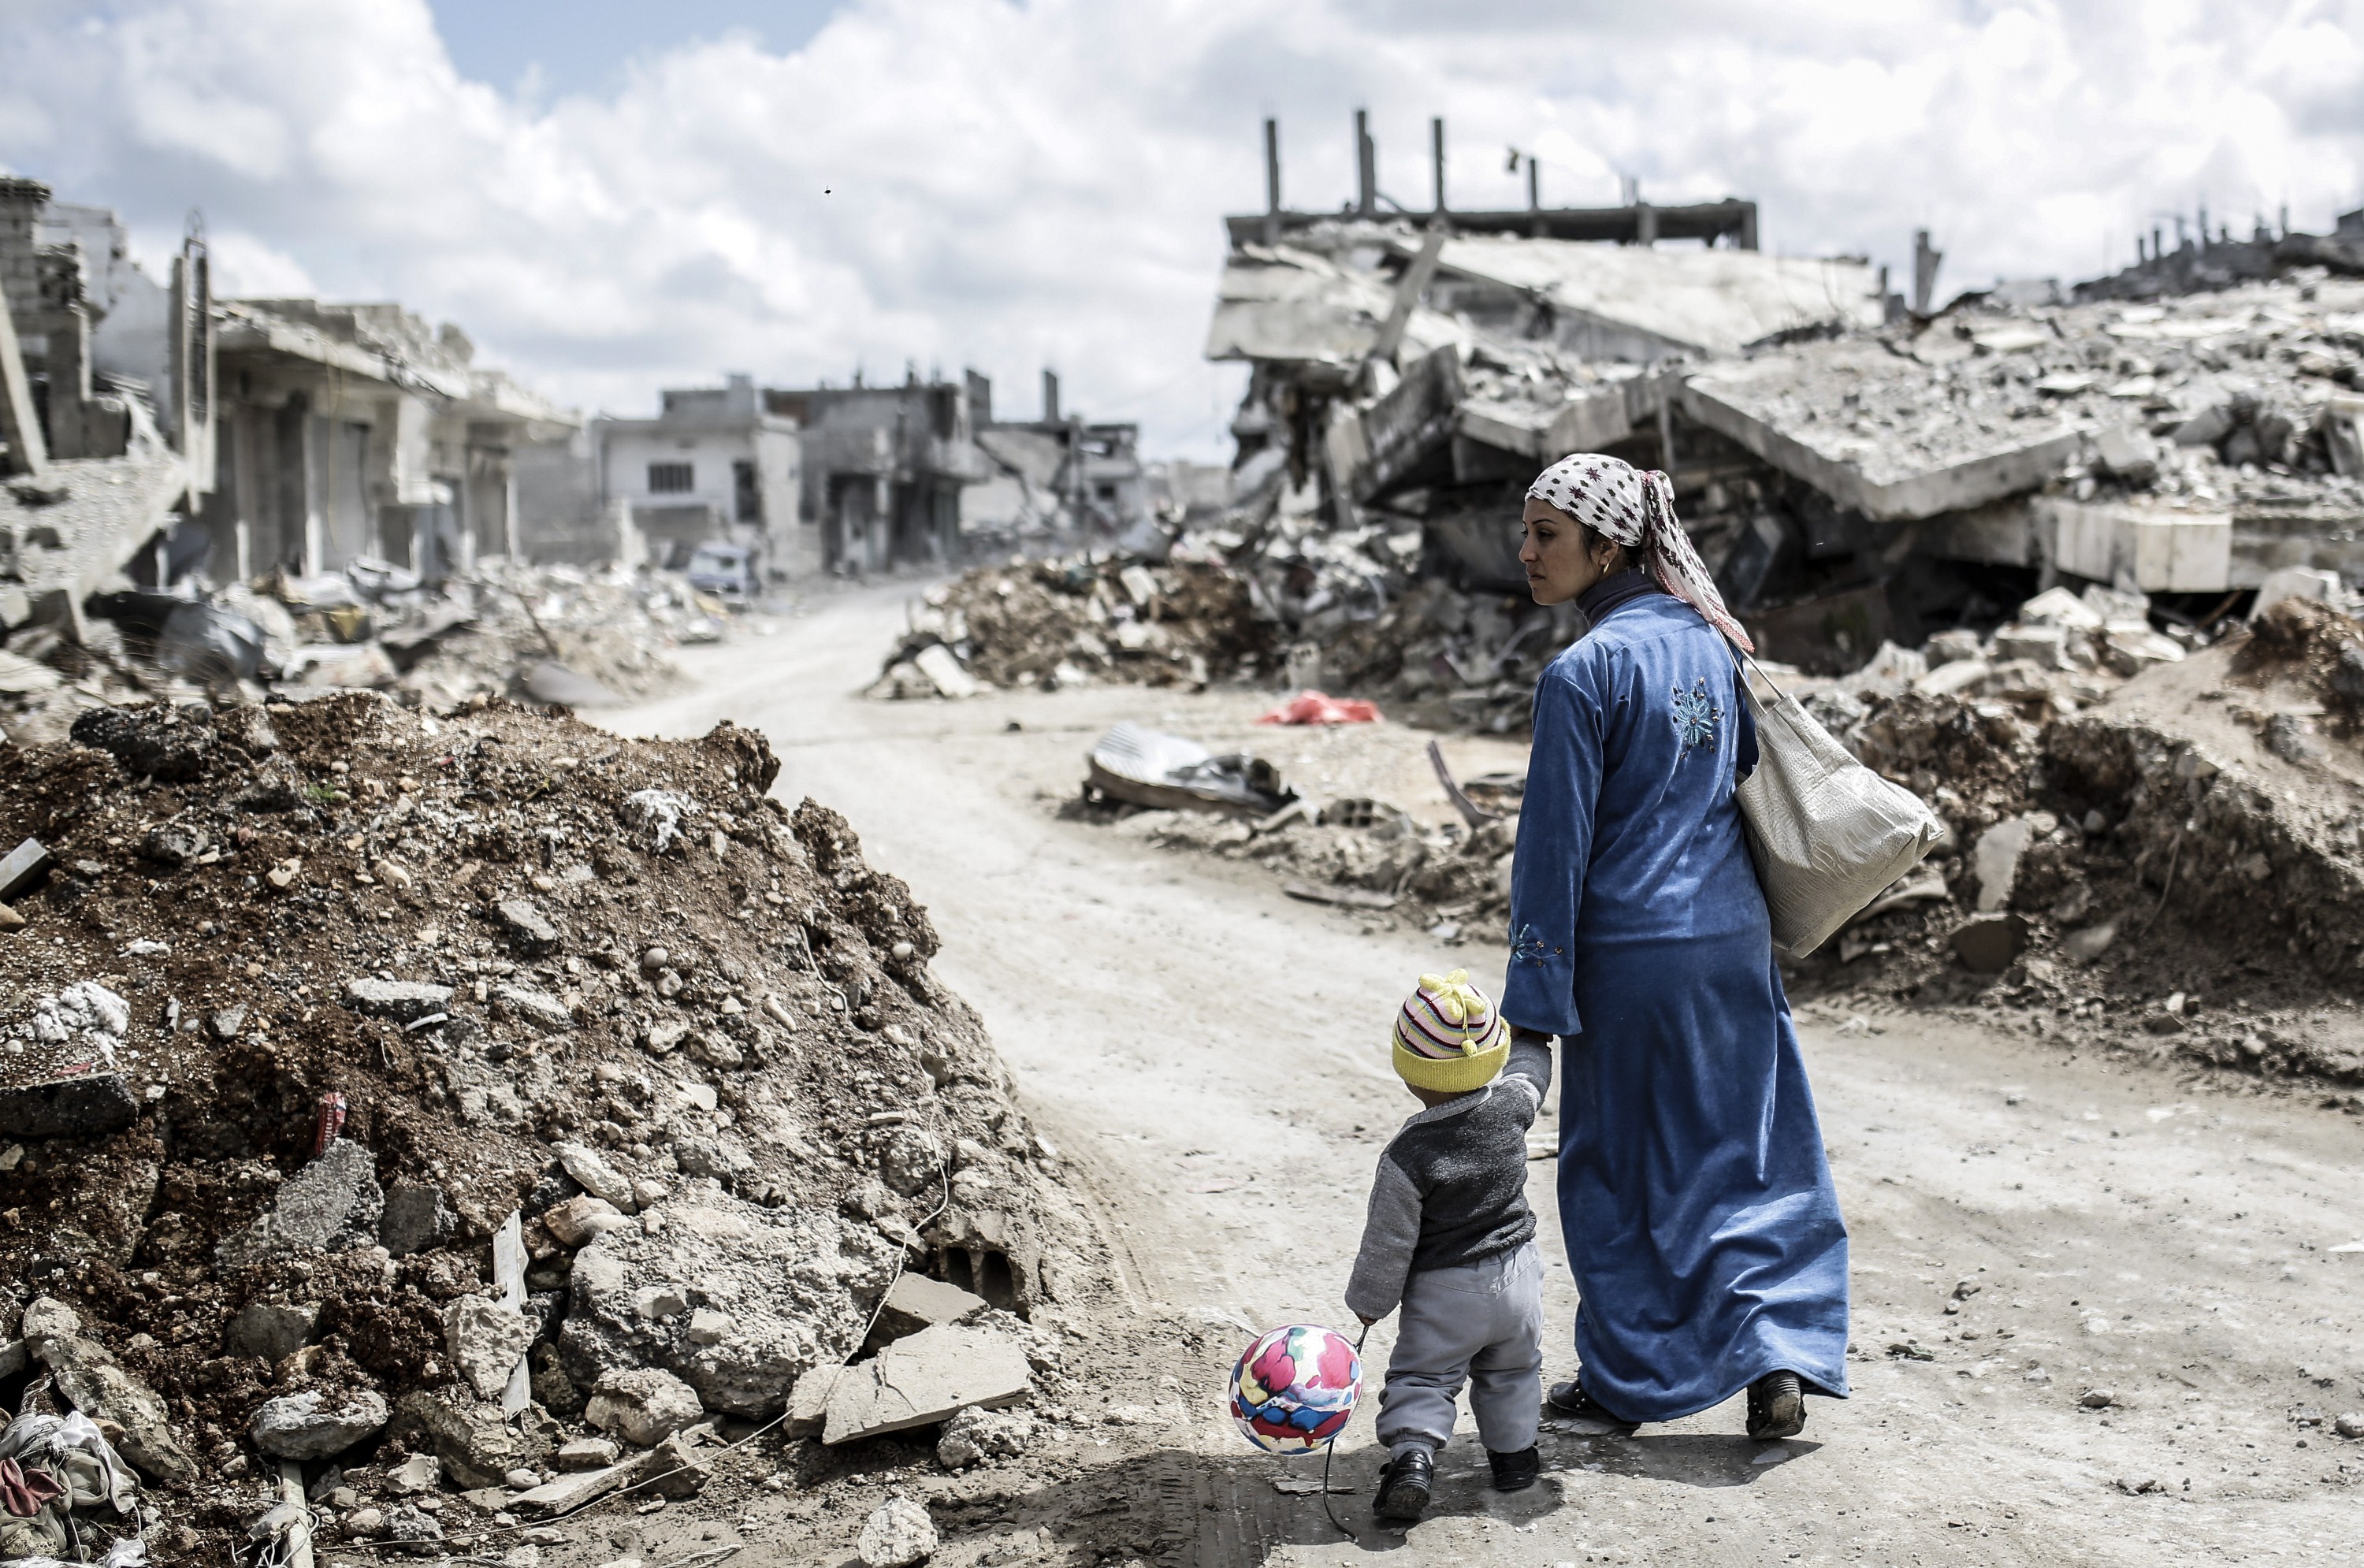 A Kurdish Syrian woman walks with her child past the ruins of the town of Kobane, also known as Ain al-Arab, on March 25, 2015. Islamic State (IS) fighters were driven out of Kobane on January 26 by Kurdish and allied forces. AFP PHOTO/YASIN AKGUL        (Photo credit should read YASIN AKGUL/AFP/Getty Images)